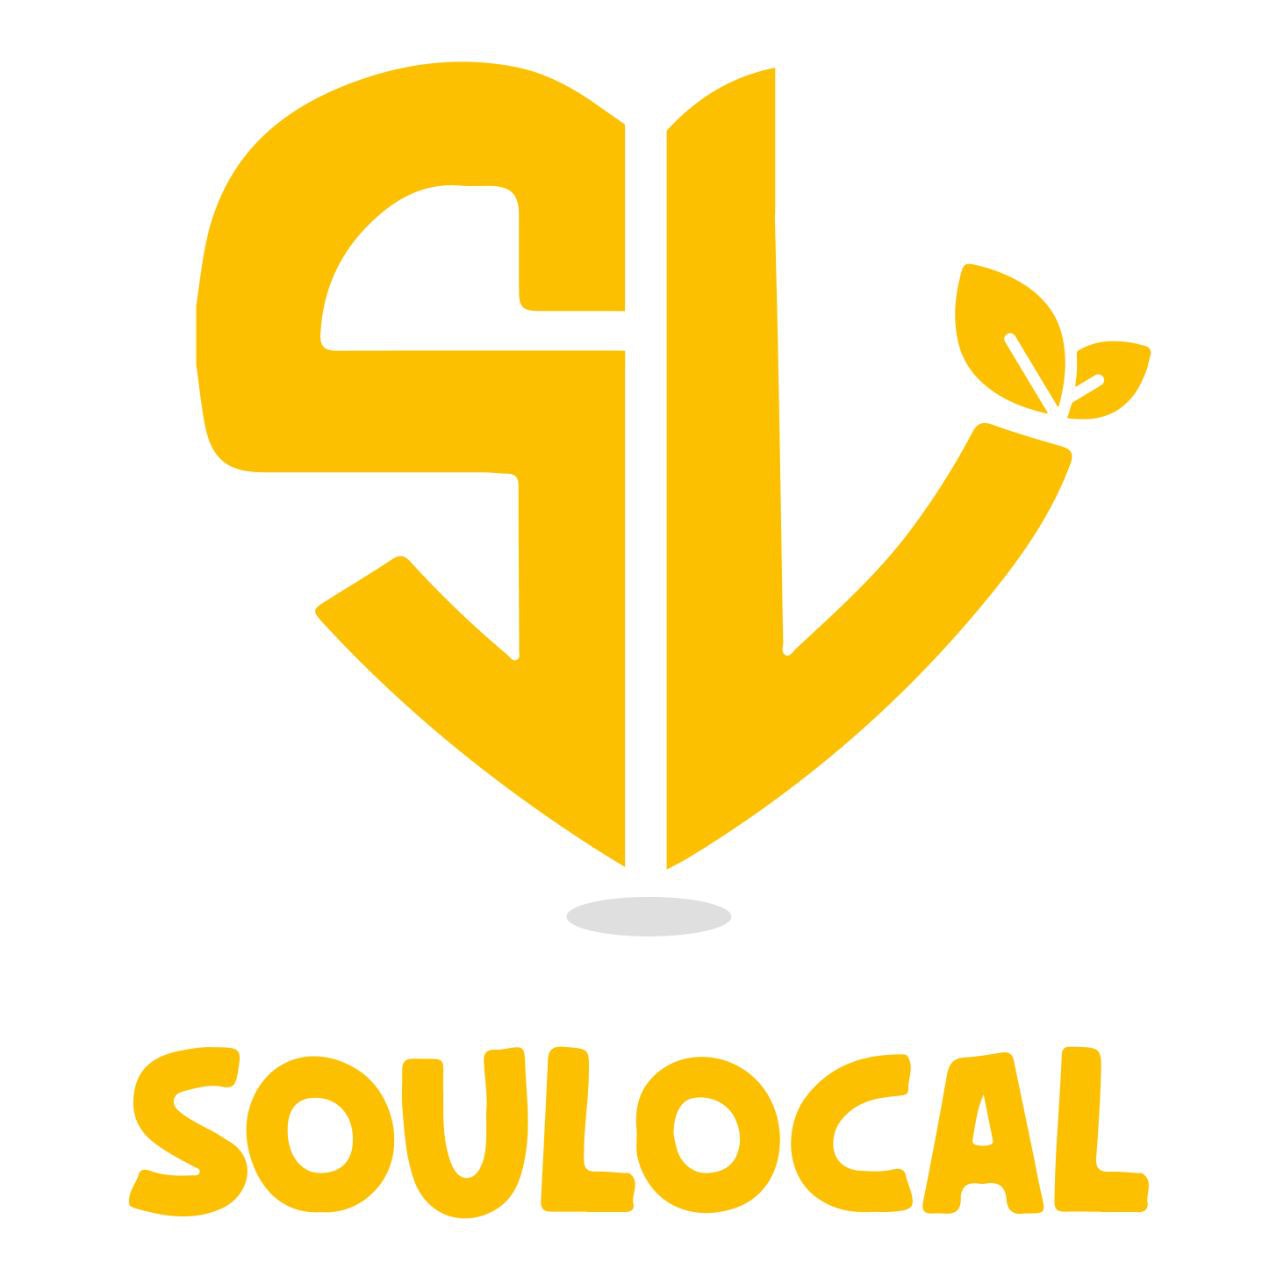 Soullocal